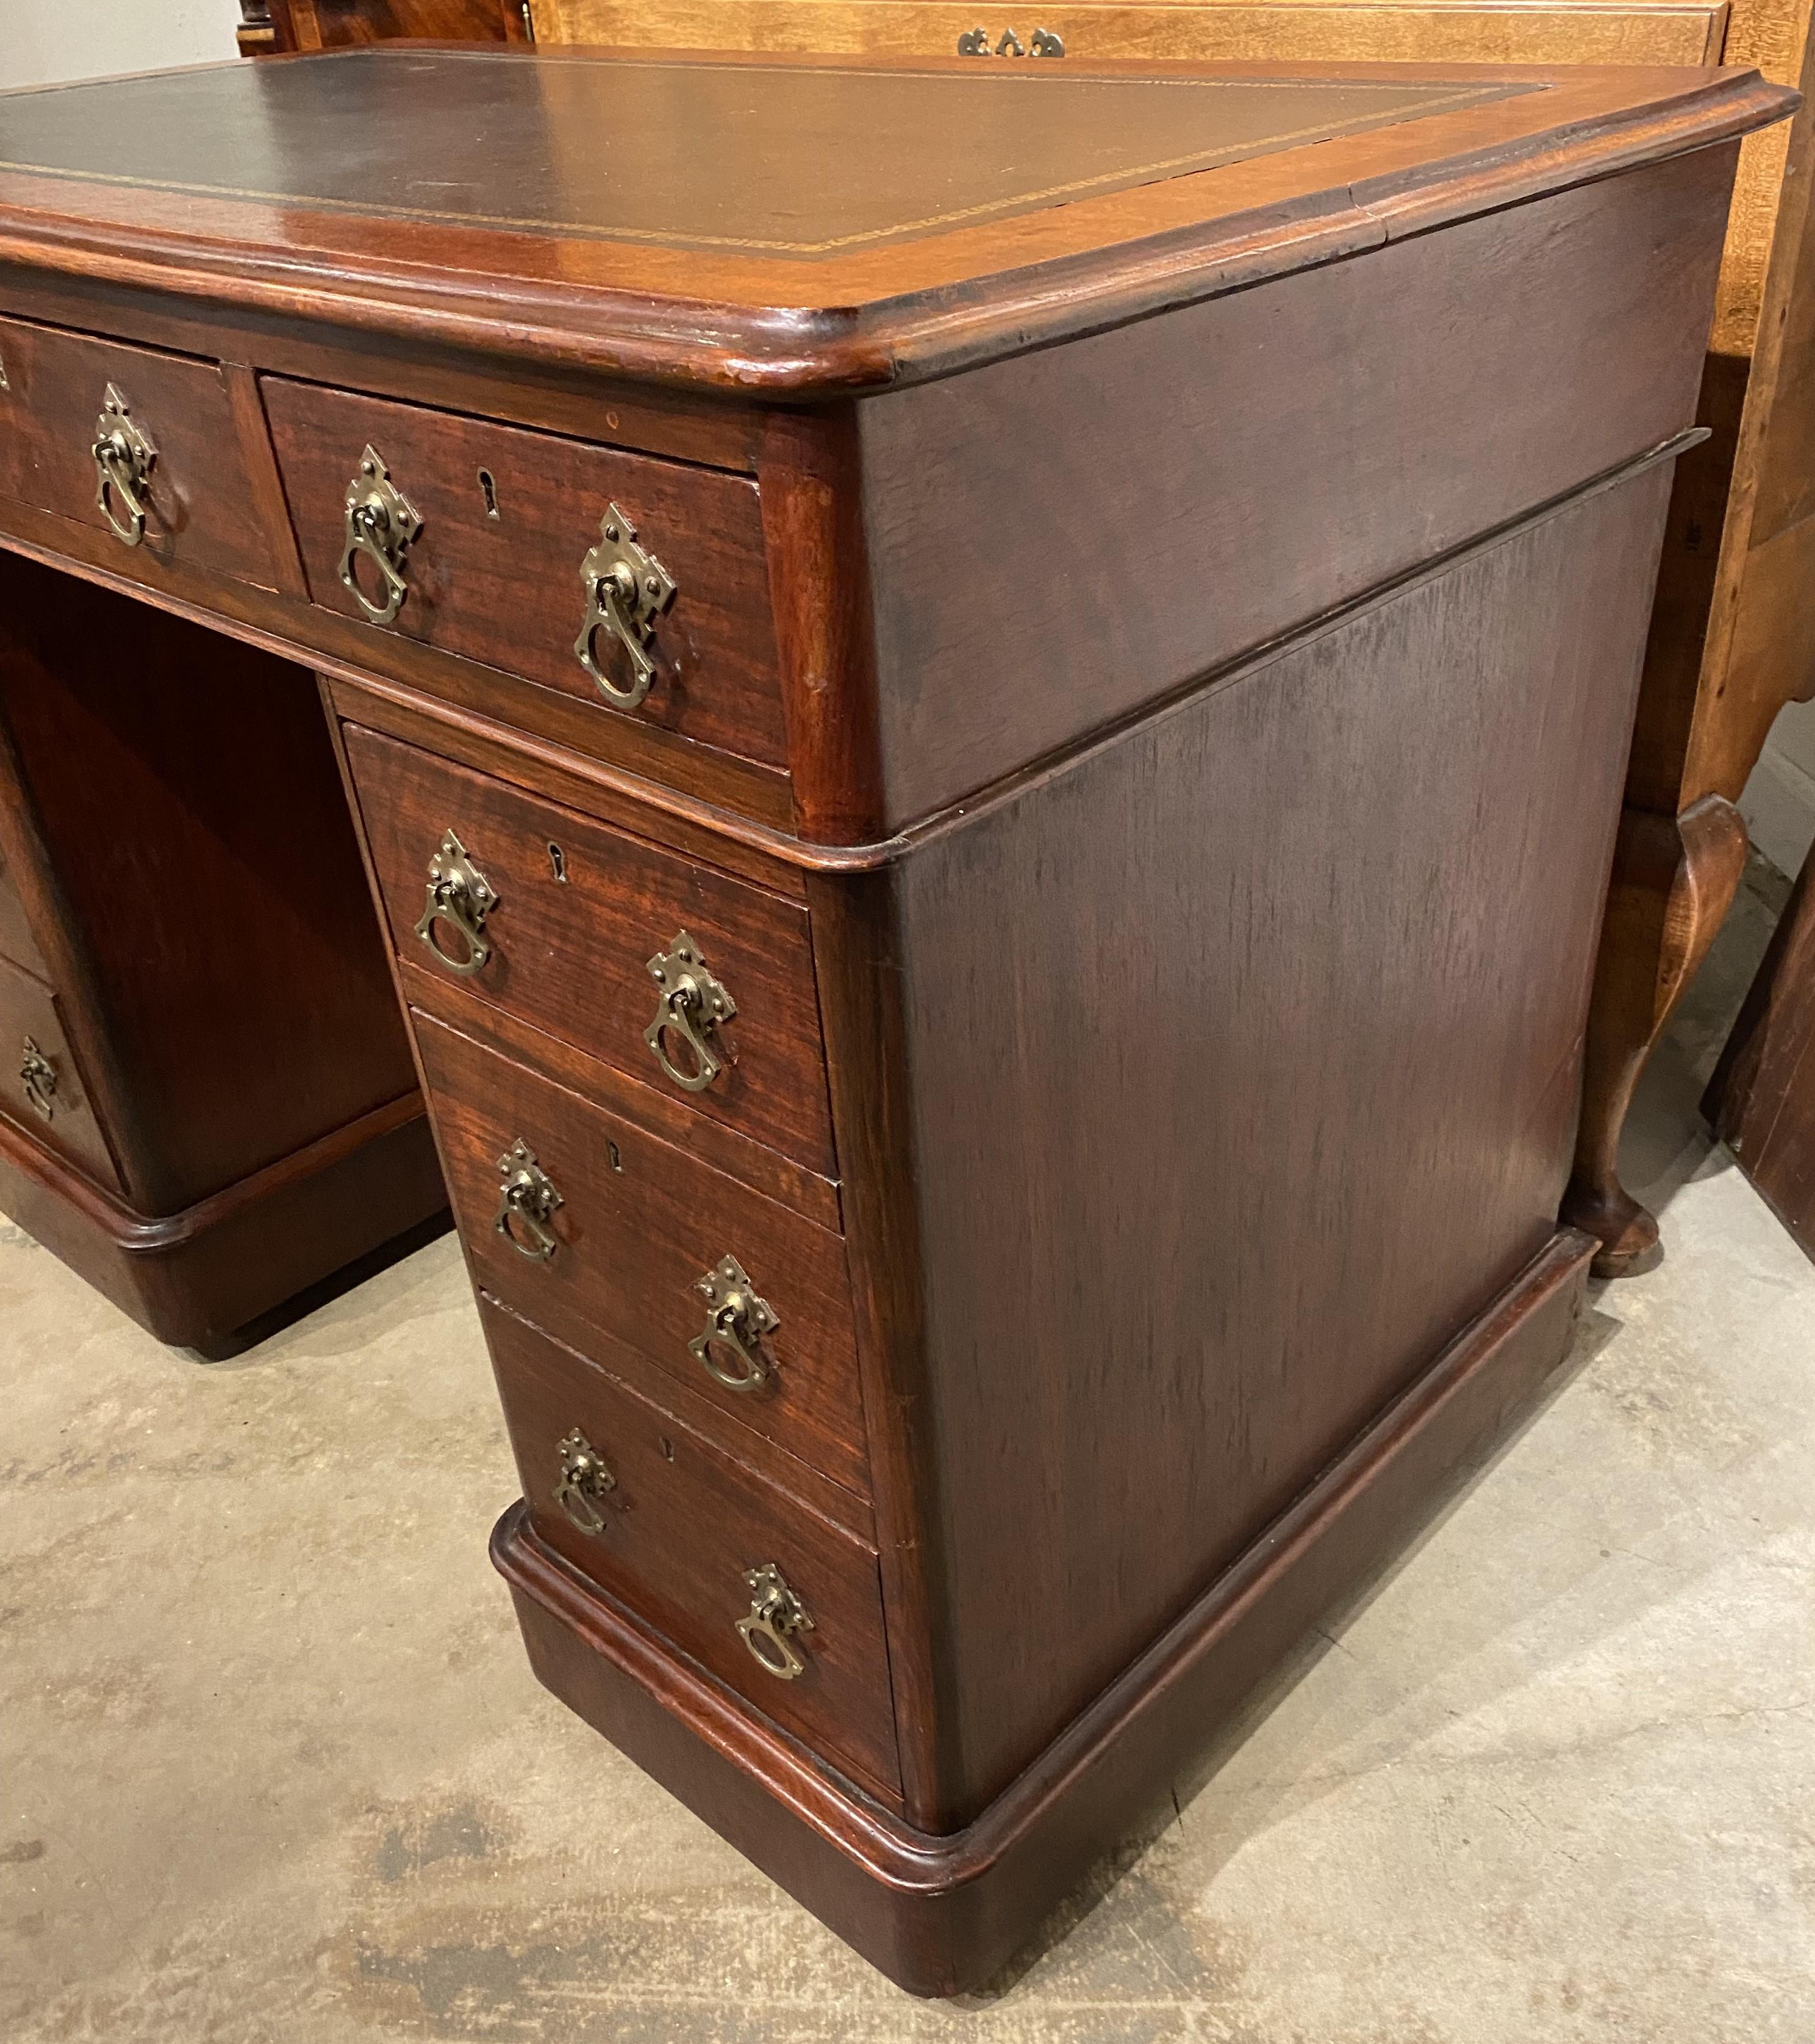 A fine diminutive Edwardian mahogany three part pedestal desk with leathered tool top and three fitted frieze drawers, with three additional fitted drawers on each pedestal, all with decorative brass pulls. Supported on casters, which need some